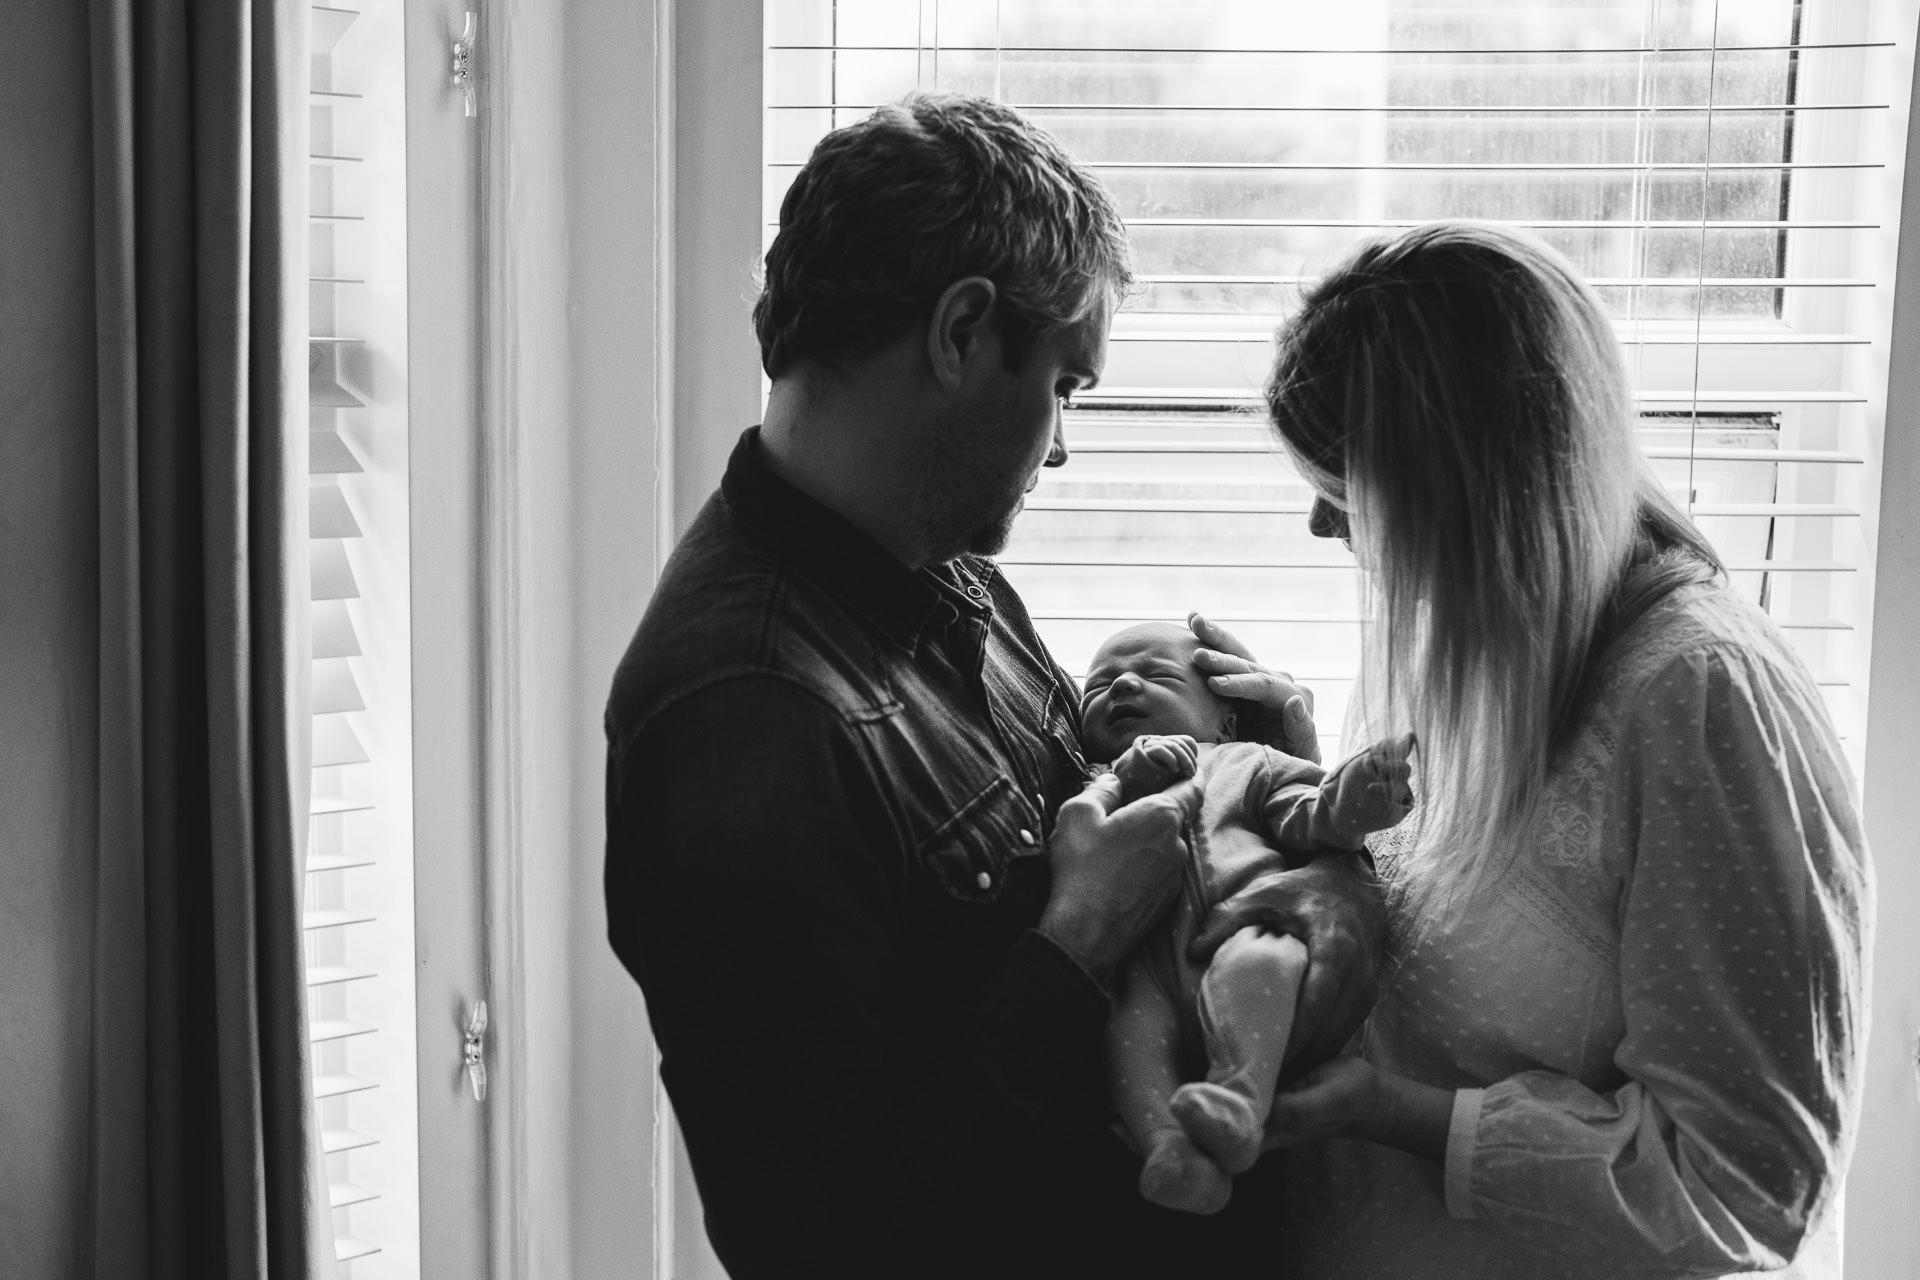 Parents standing by the window cuddling a newborn baby